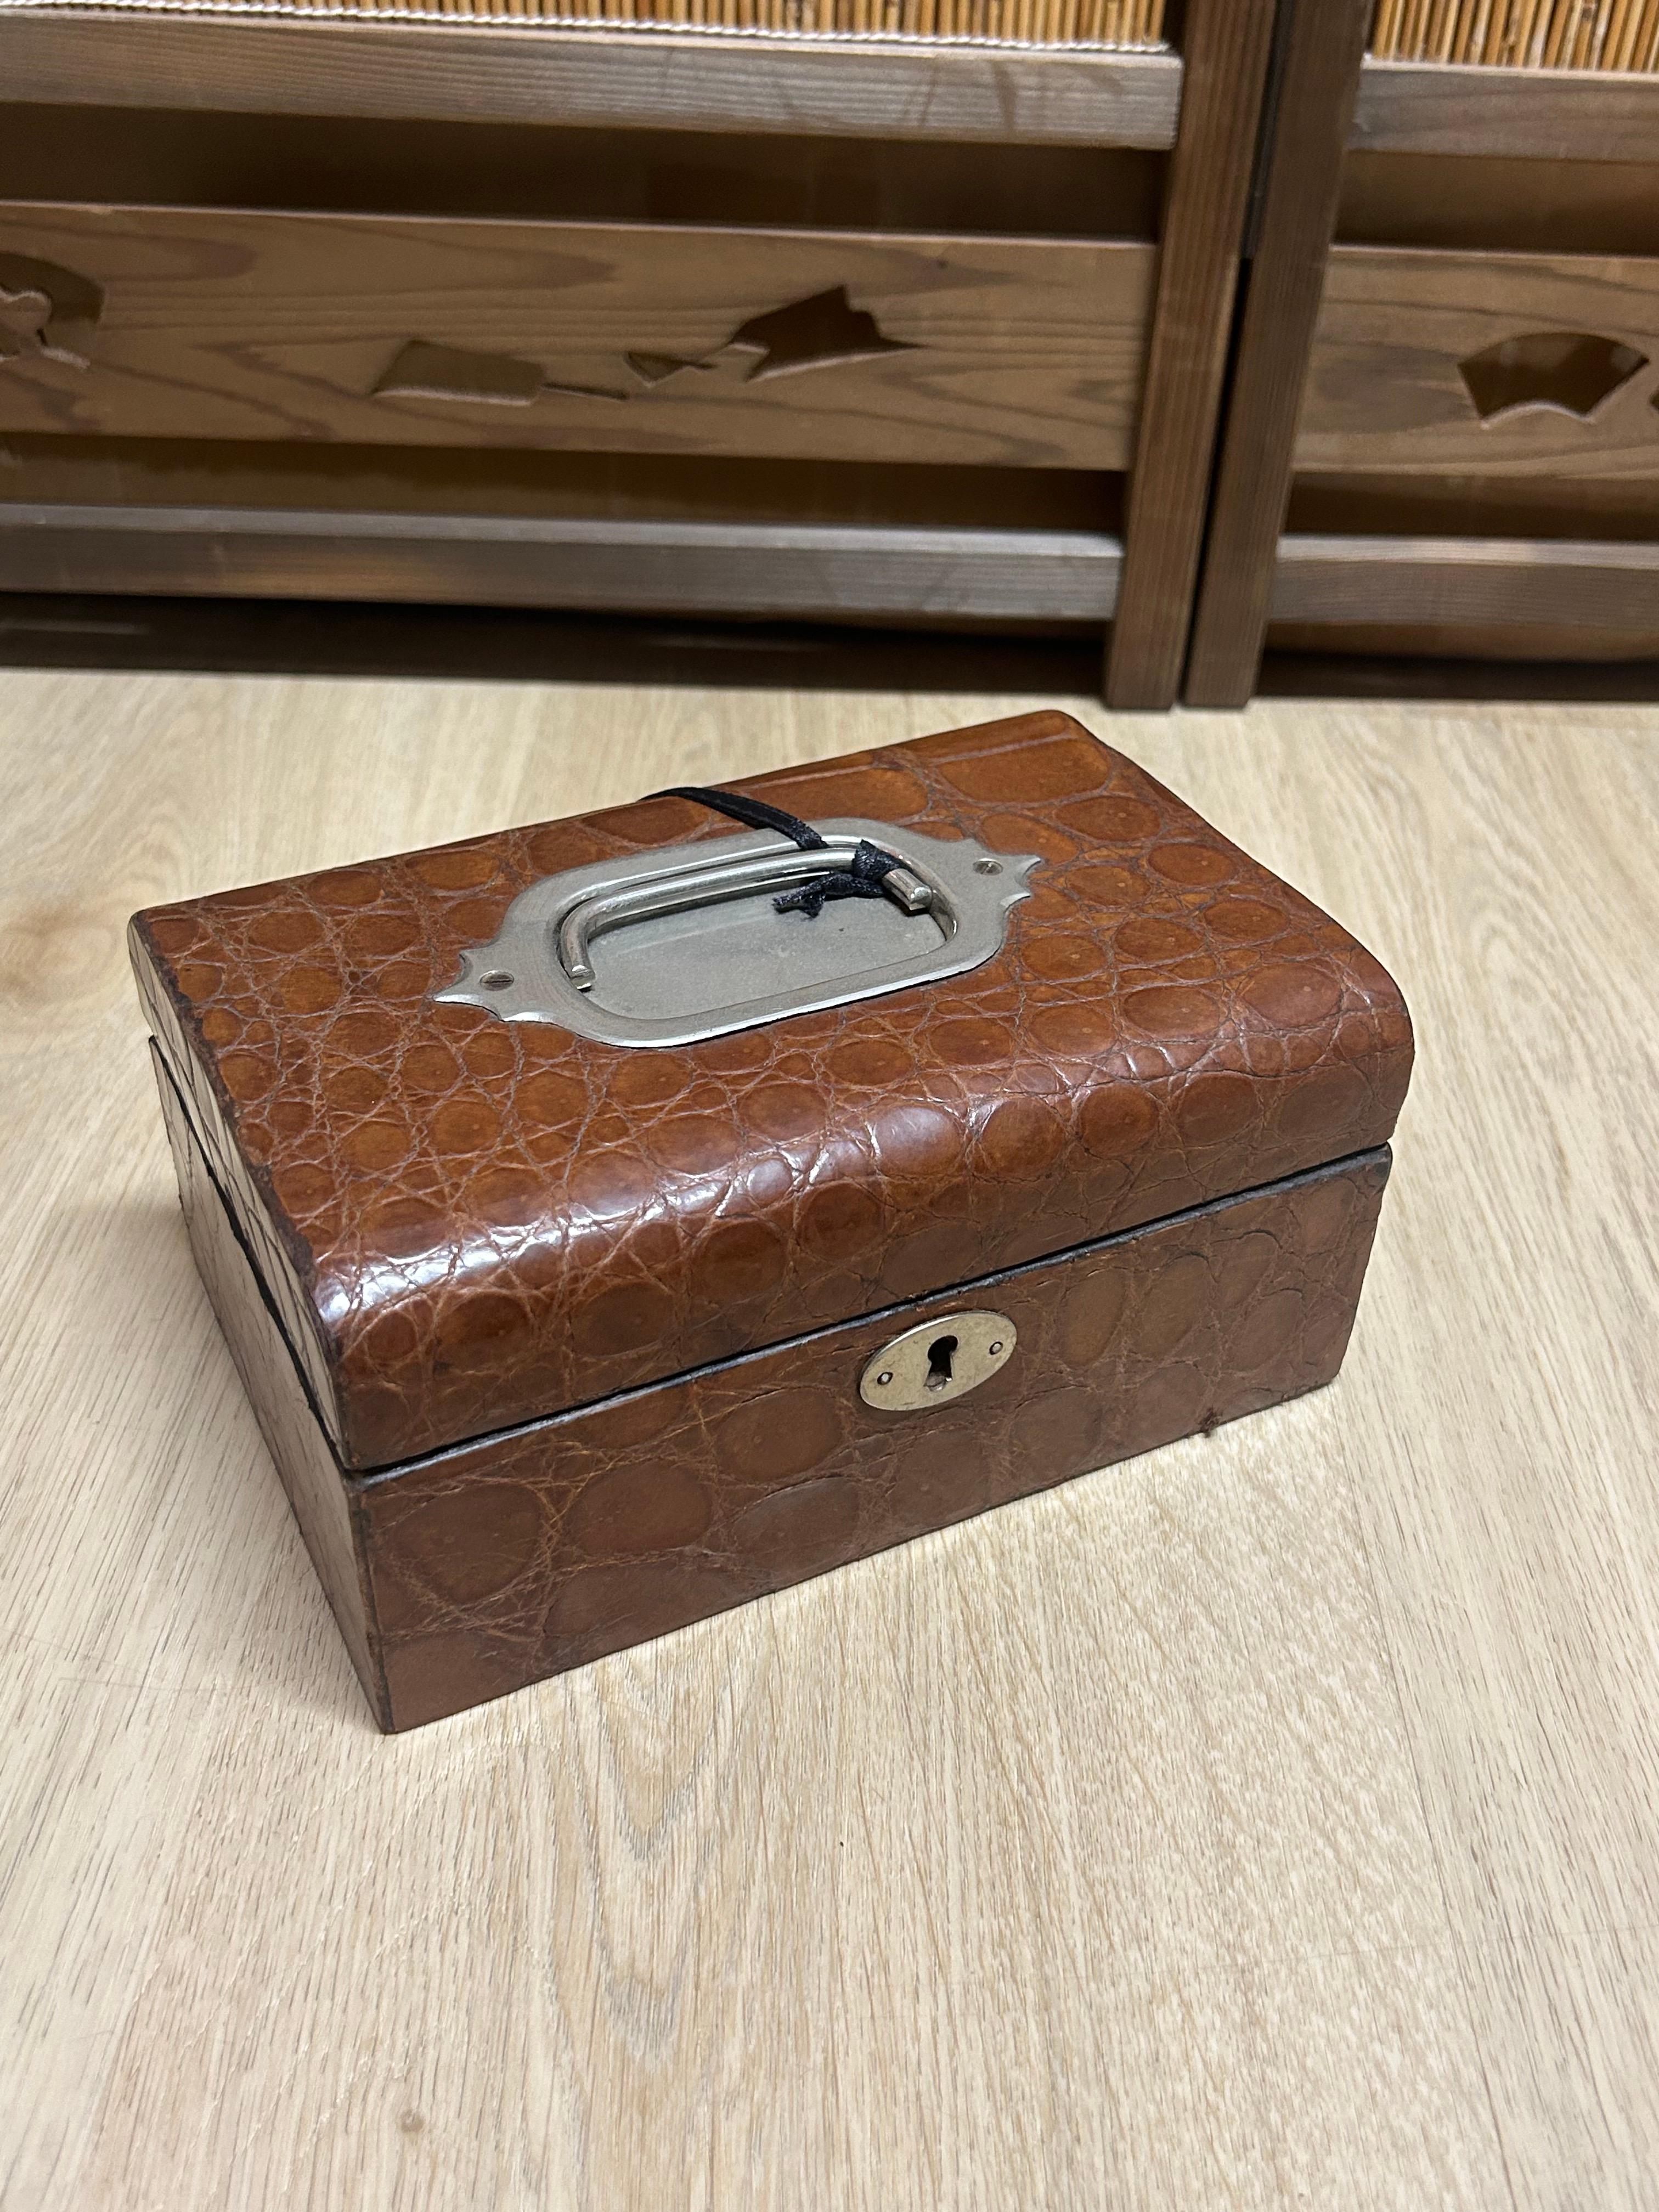 Small Alligator Jewellery box, containing a small removable tray for jewellery. On the centre of the lid a metal handle is attached, This box should have been a a travelling jewellery box, unfortunately the key is long gone.

The pictures are part